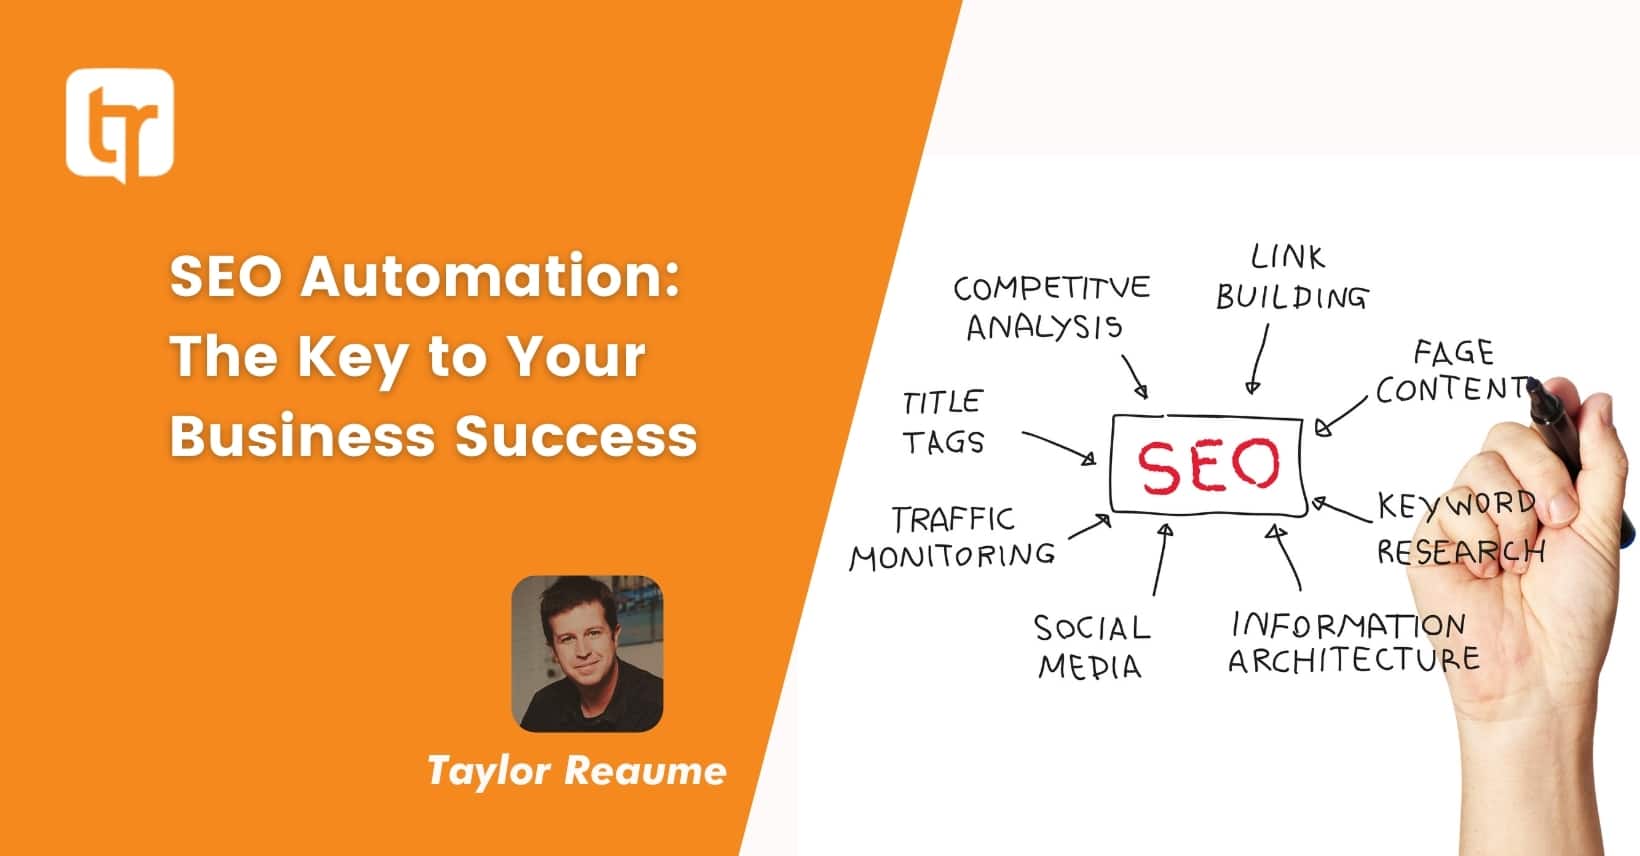 SEO Automation: The Key to Your Business Success